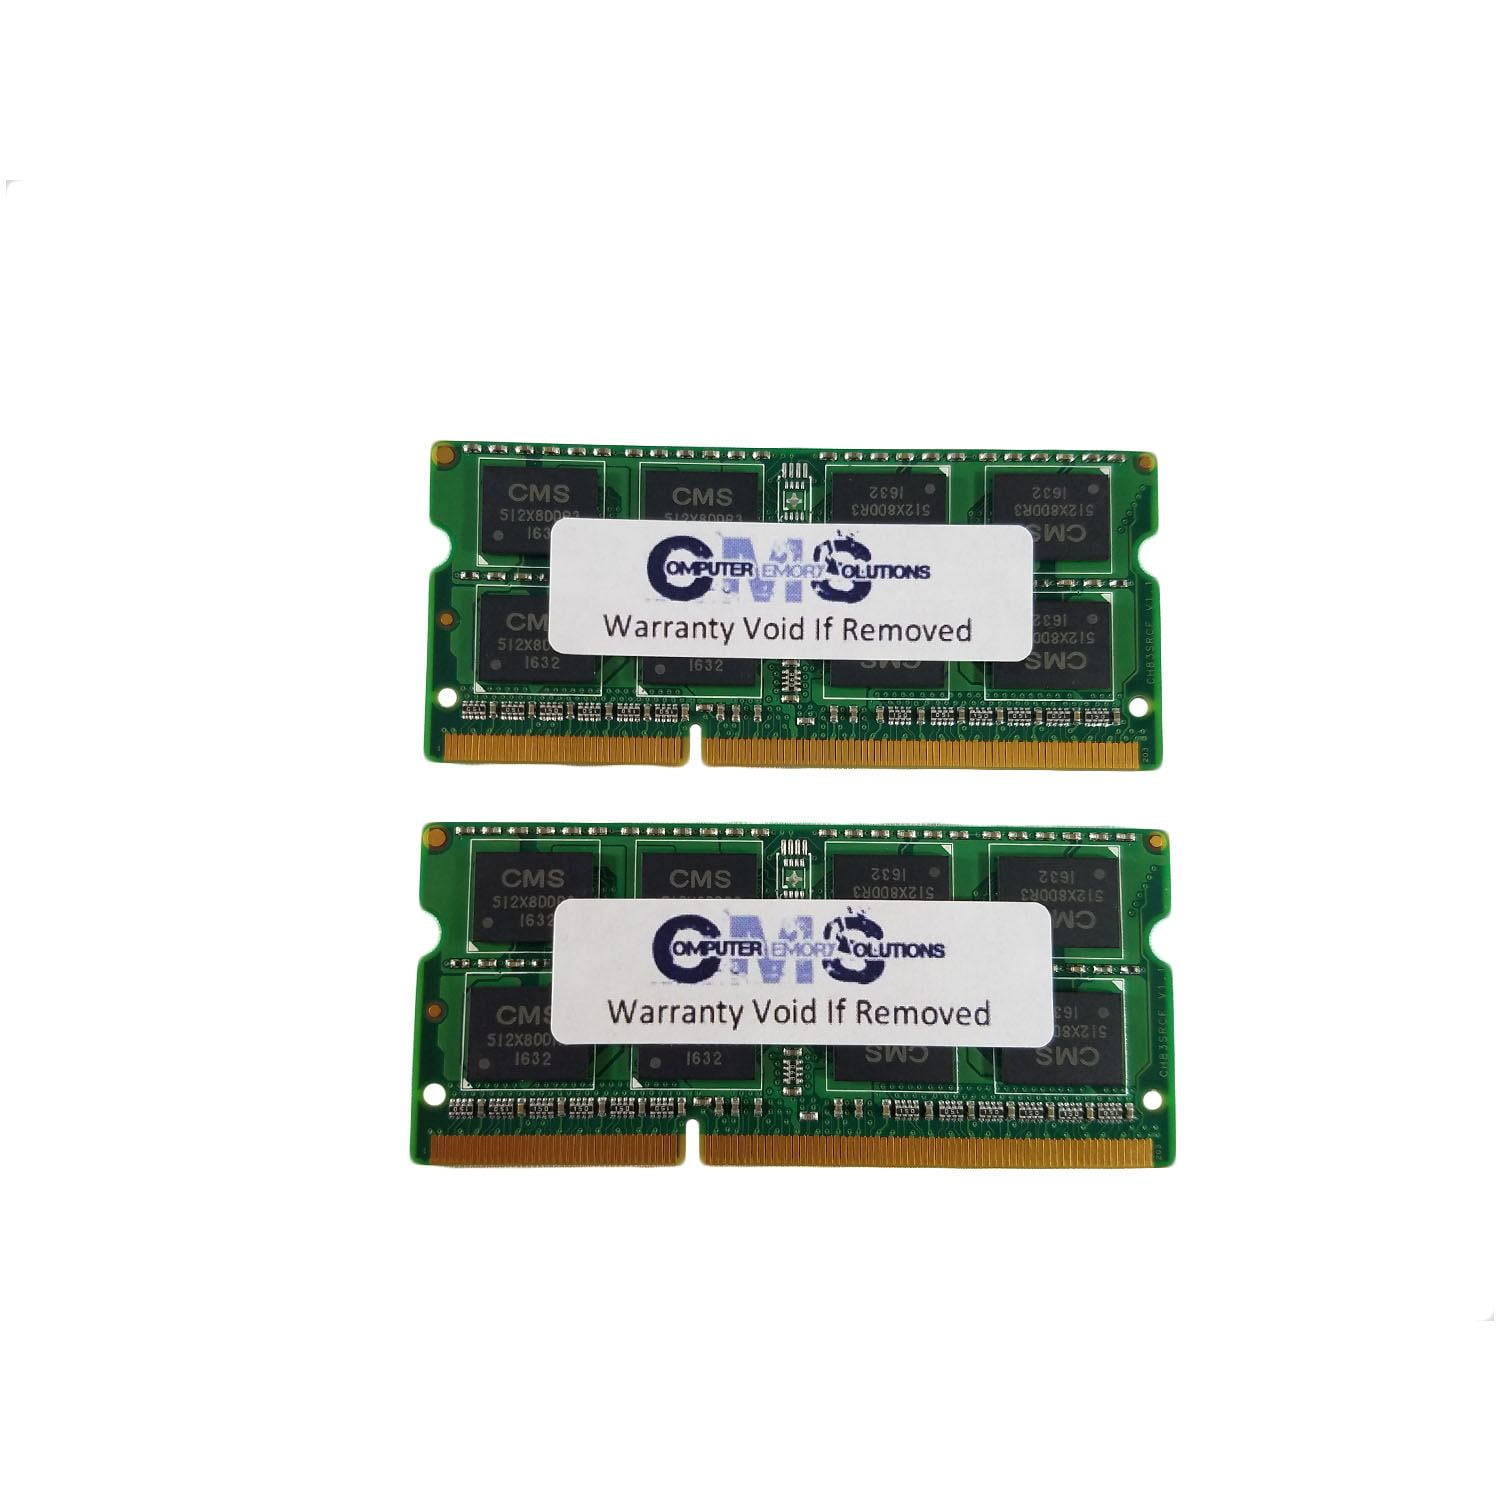 New 4GB Kit 2x2GB PC2-5300 DDR2-667MHz Laptop Memory For Dell Inspiron 1525 1526 